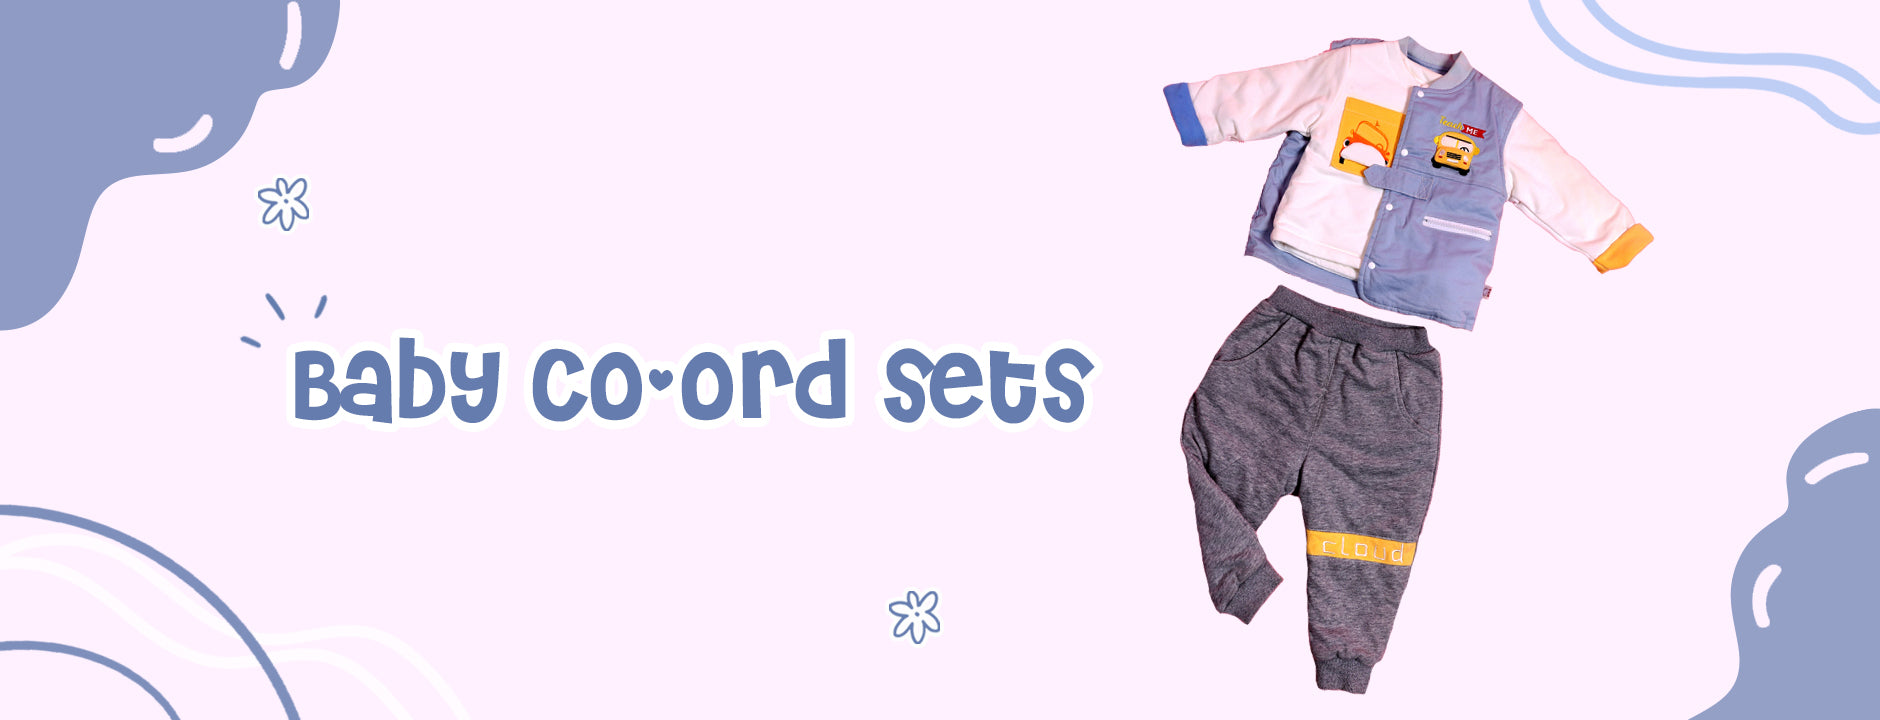 Baby Co-ord Sets